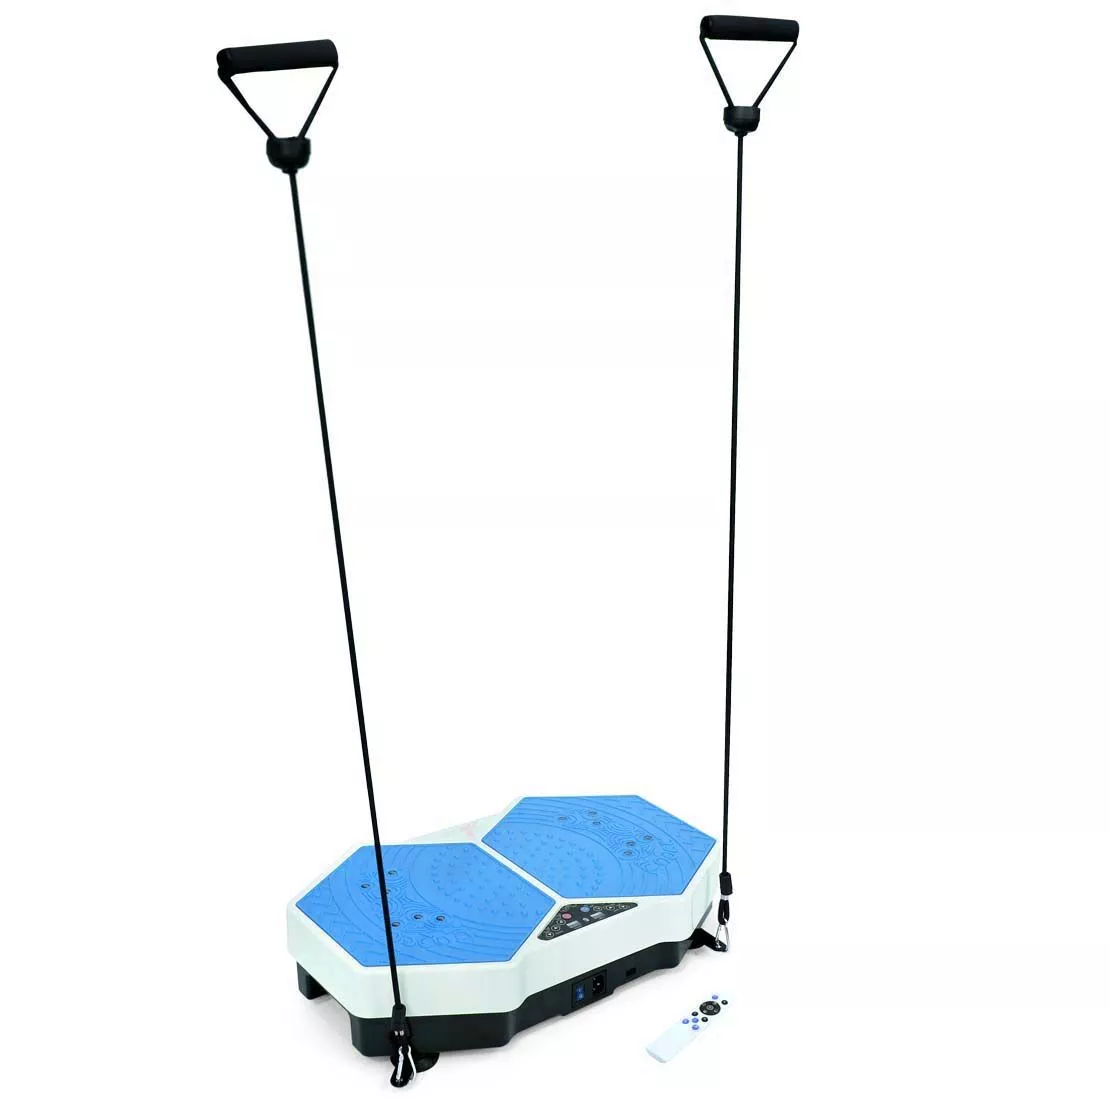 Eid Al Fitr offers from Citruss TV Gear! A device for exercising and burning fat today at half the price!